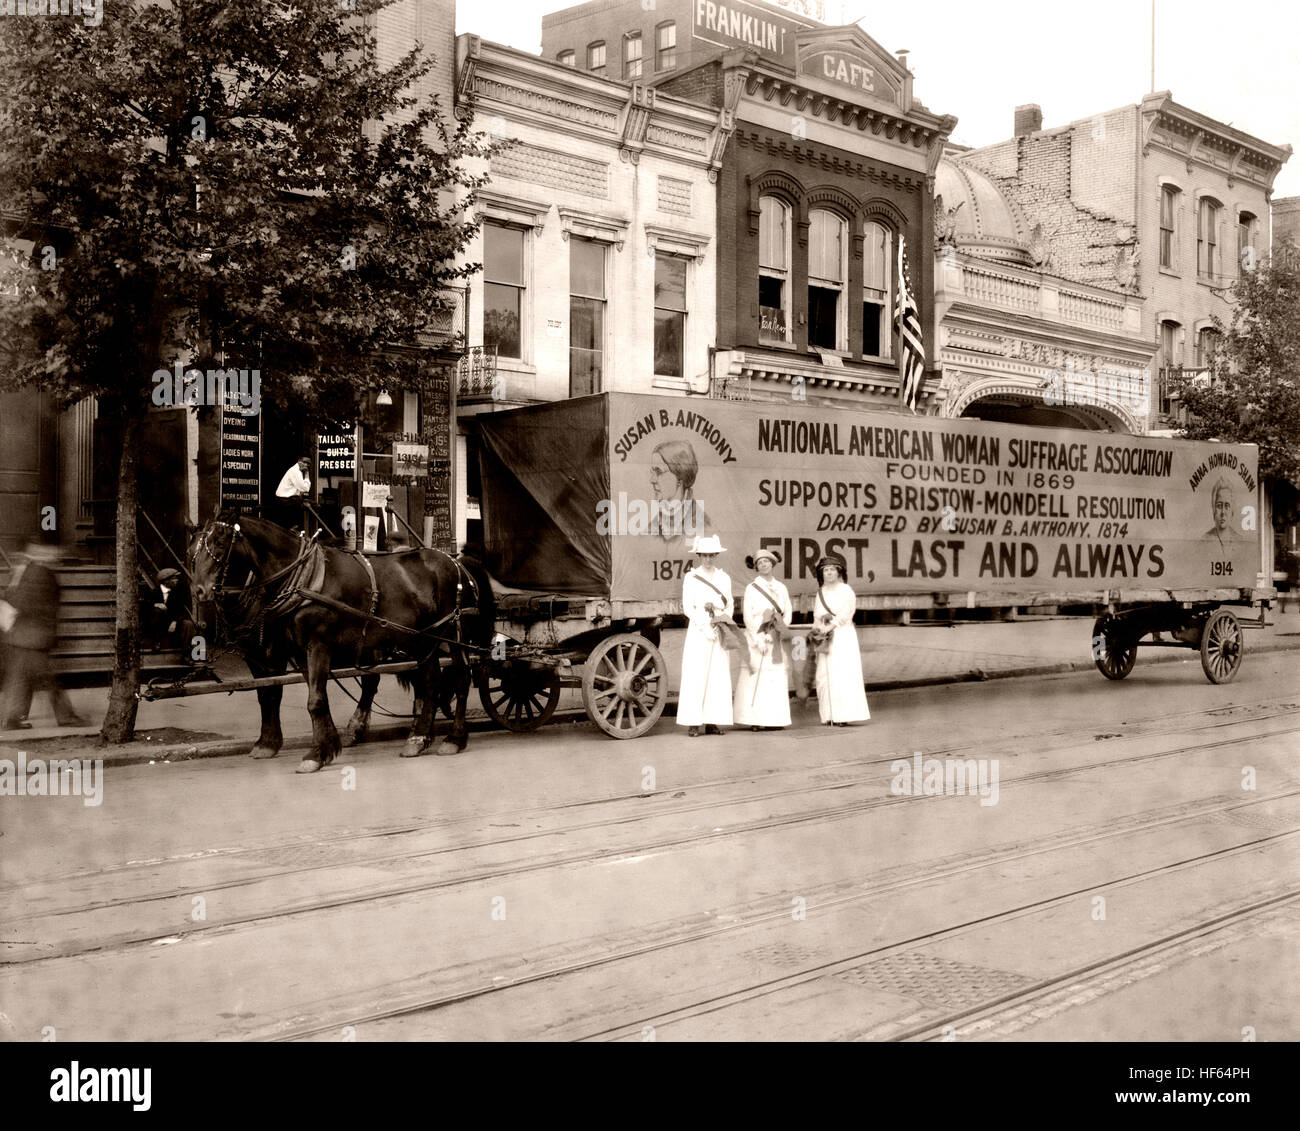 Three women standing in street in front of horse-drawn wagon with sign, 'National American Woman Suffrage Association founded in 1869 supports Bristow-Mondell Resolution drafted by Susan B. Anthony, 1874, 'First, Last and Always.' Circa 1917. Stock Photo